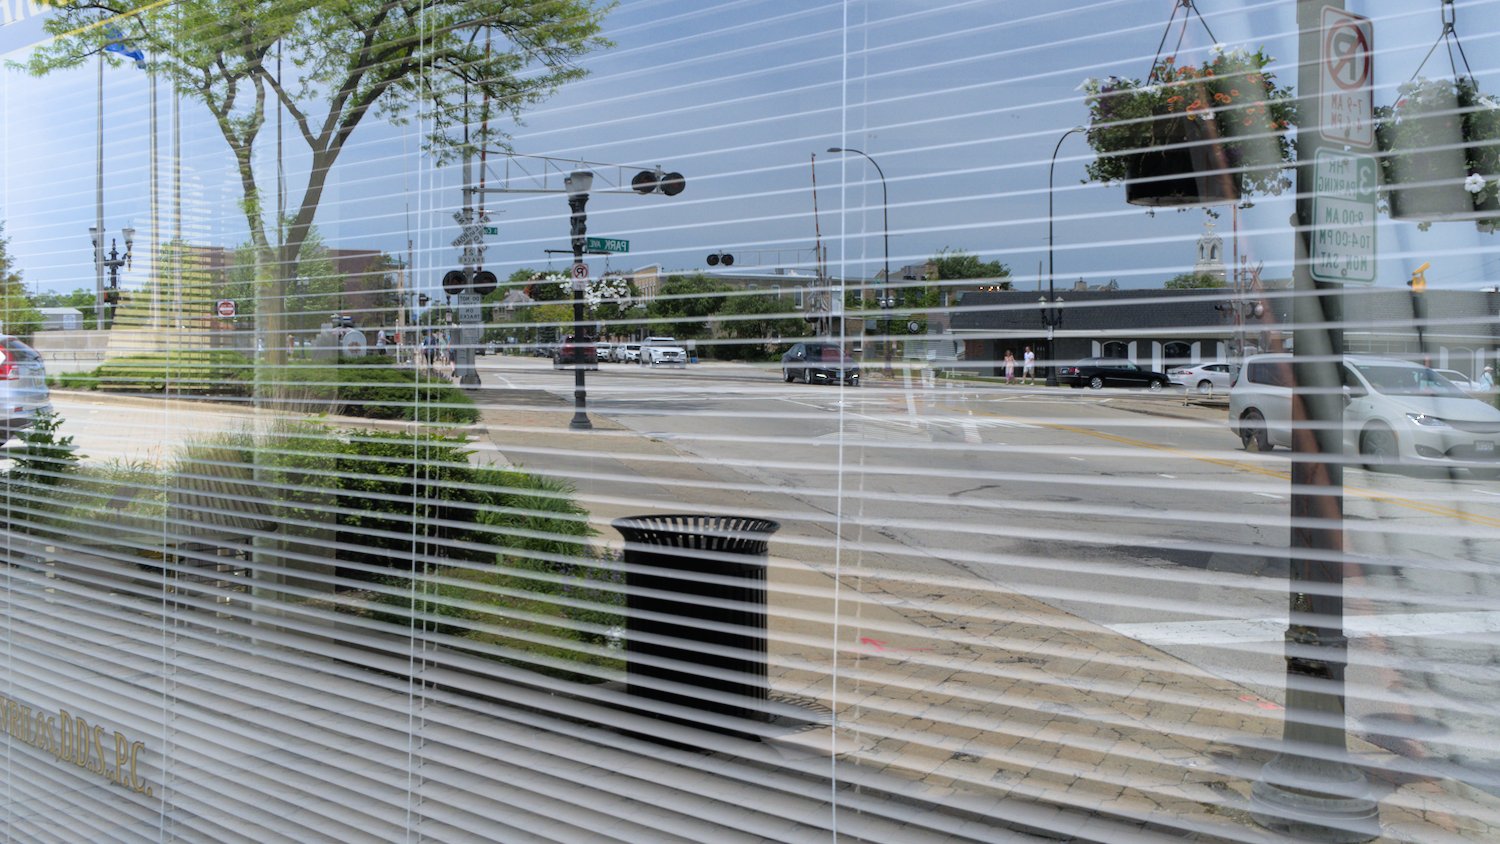 Reflection of traffic in office window with metal blind.